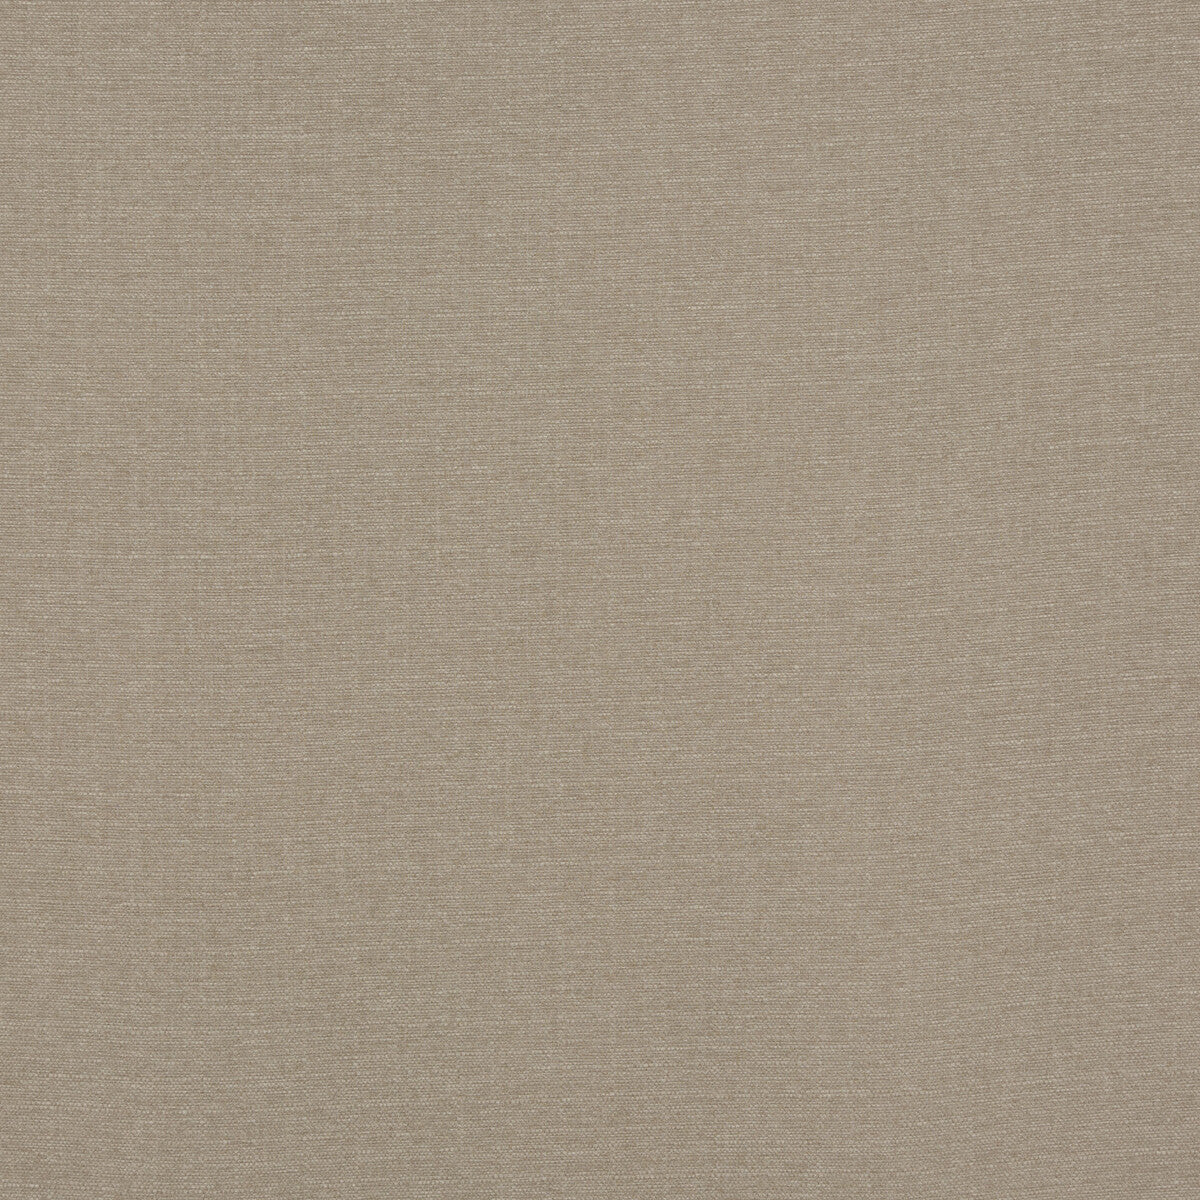 Lansdowne fabric in taupe color - pattern PF50413.210.0 - by Baker Lifestyle in the Notebooks collection